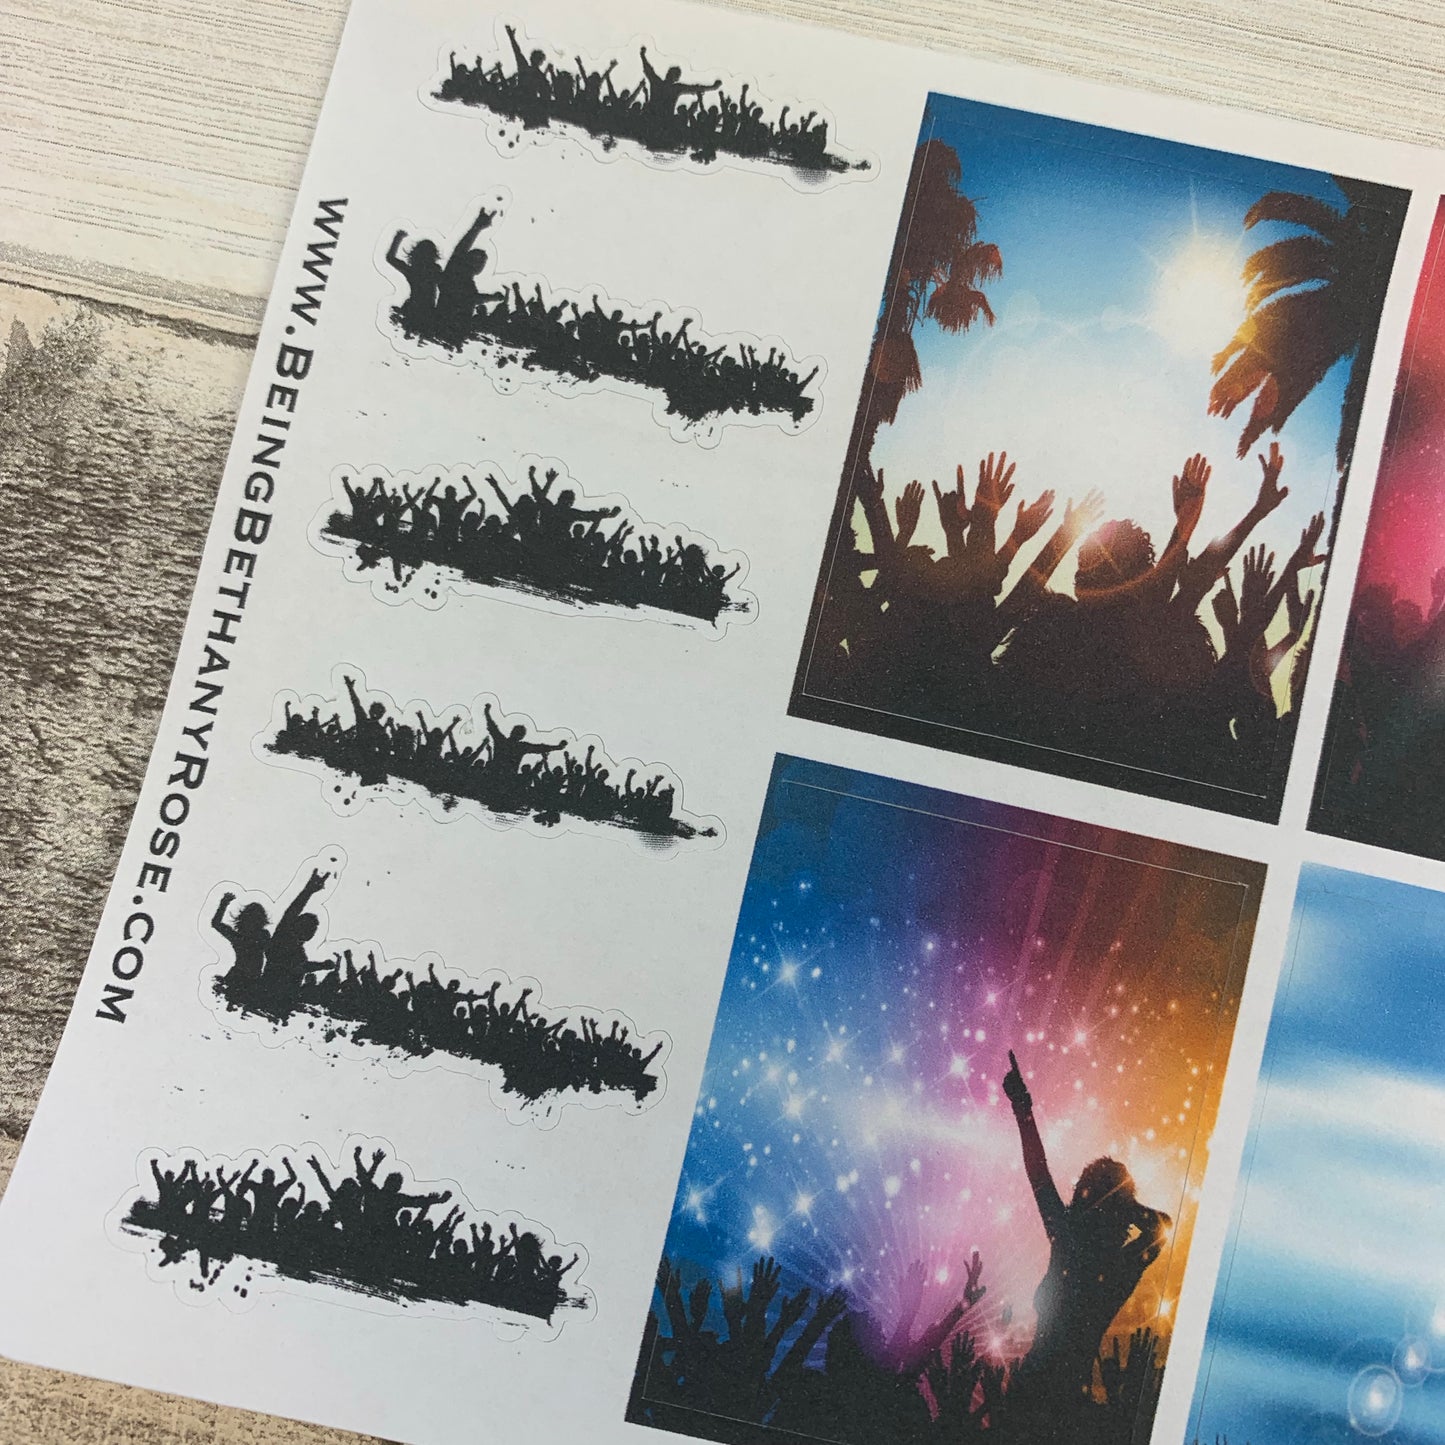 Party / Ibiza / Rave stickers (DPD342)